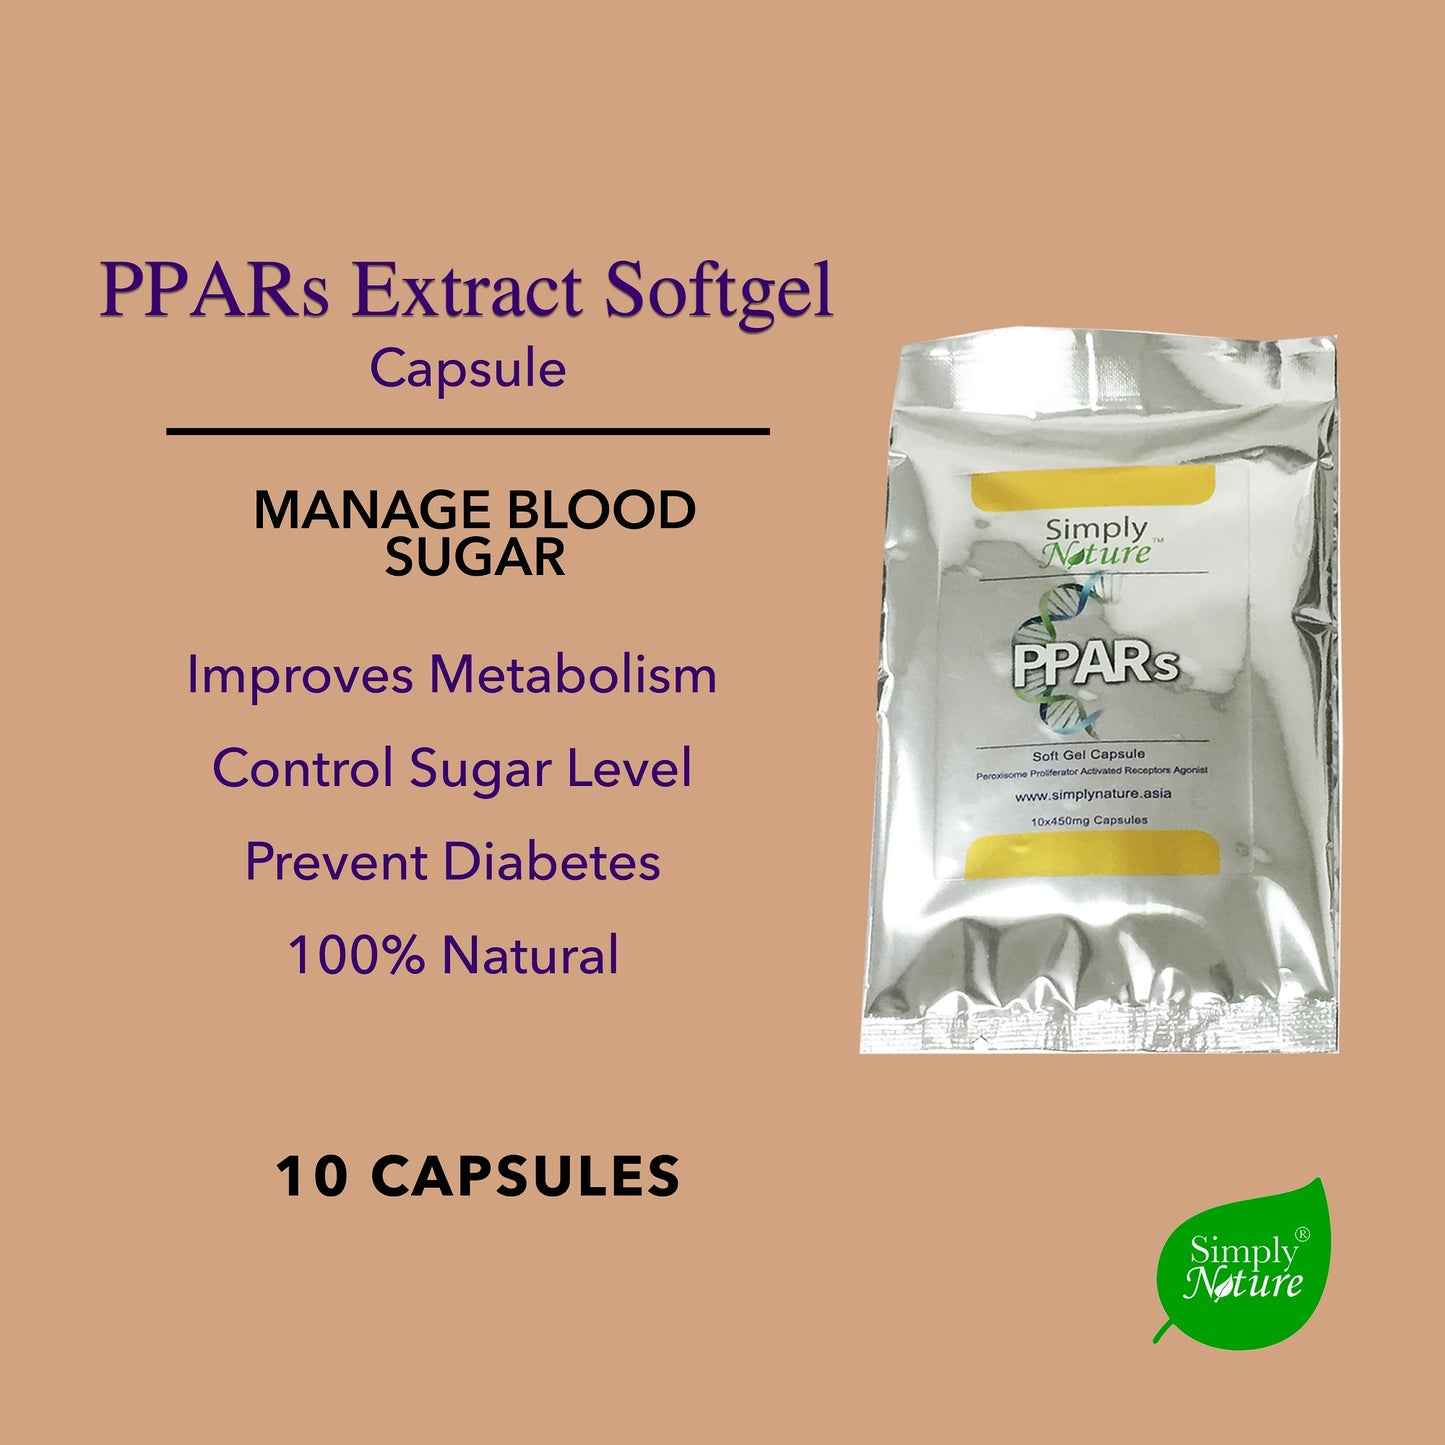 PPARs Extract Softgel